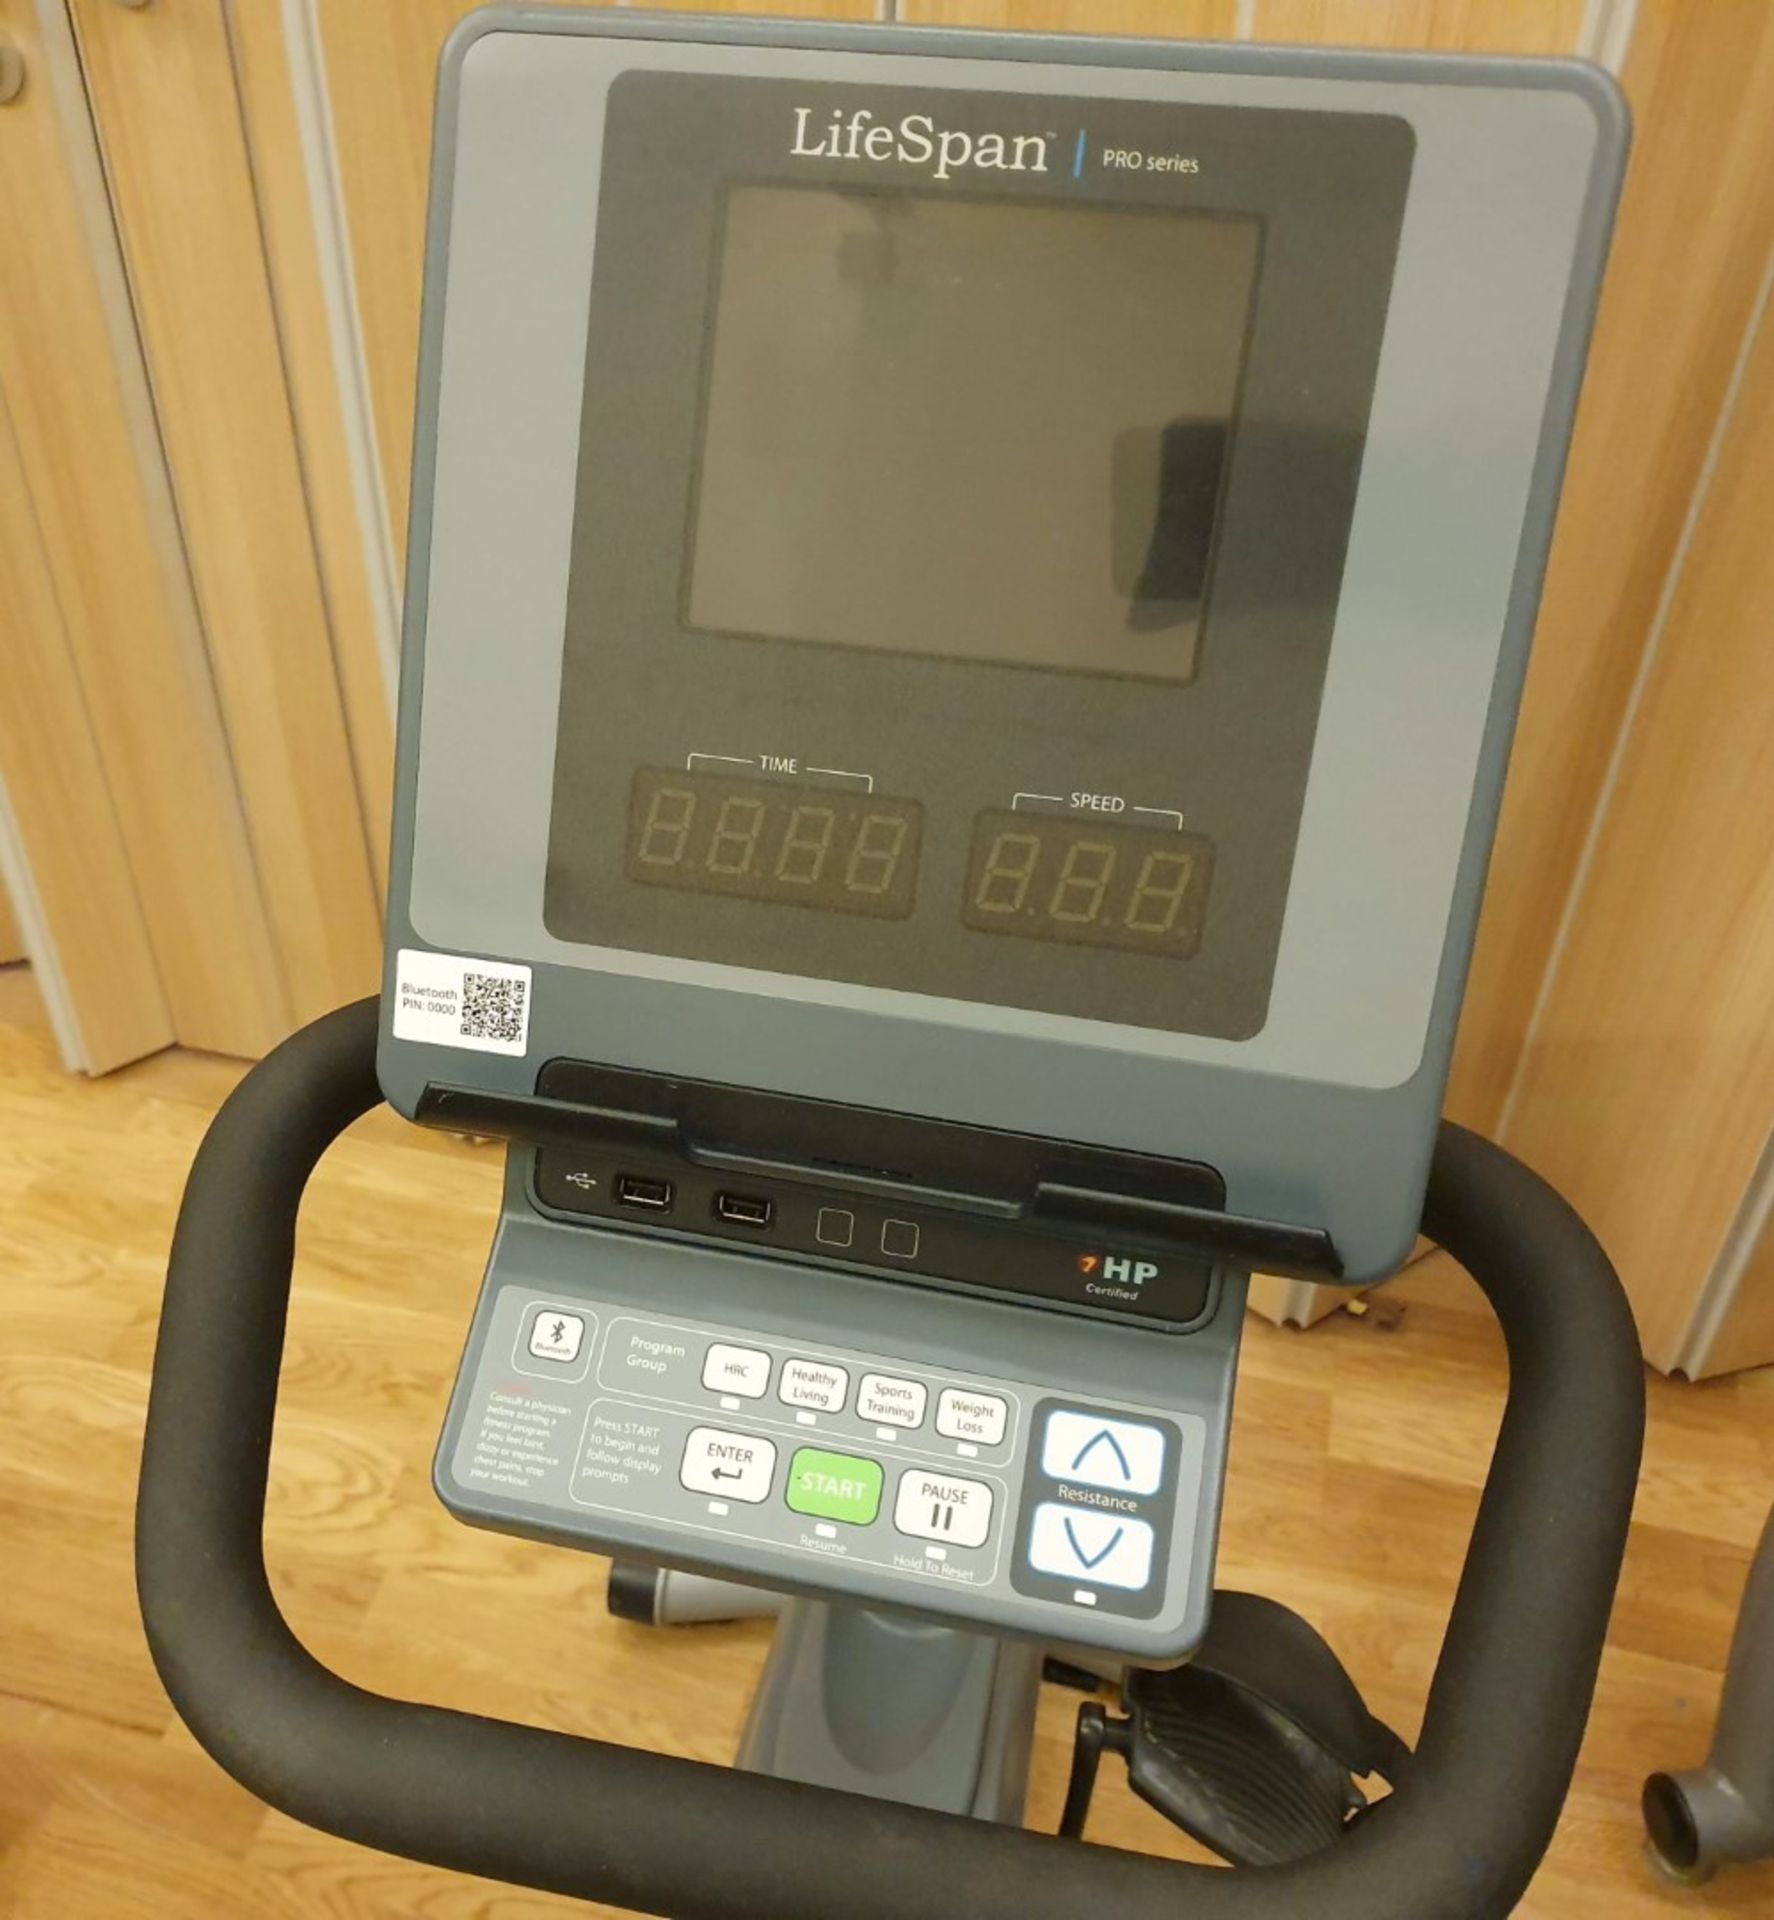 1 x Lifespan R7000 Pro Series Excercise Bike With USB Connectivity - Approx RRP £1,500 - CL552 - - Image 4 of 6